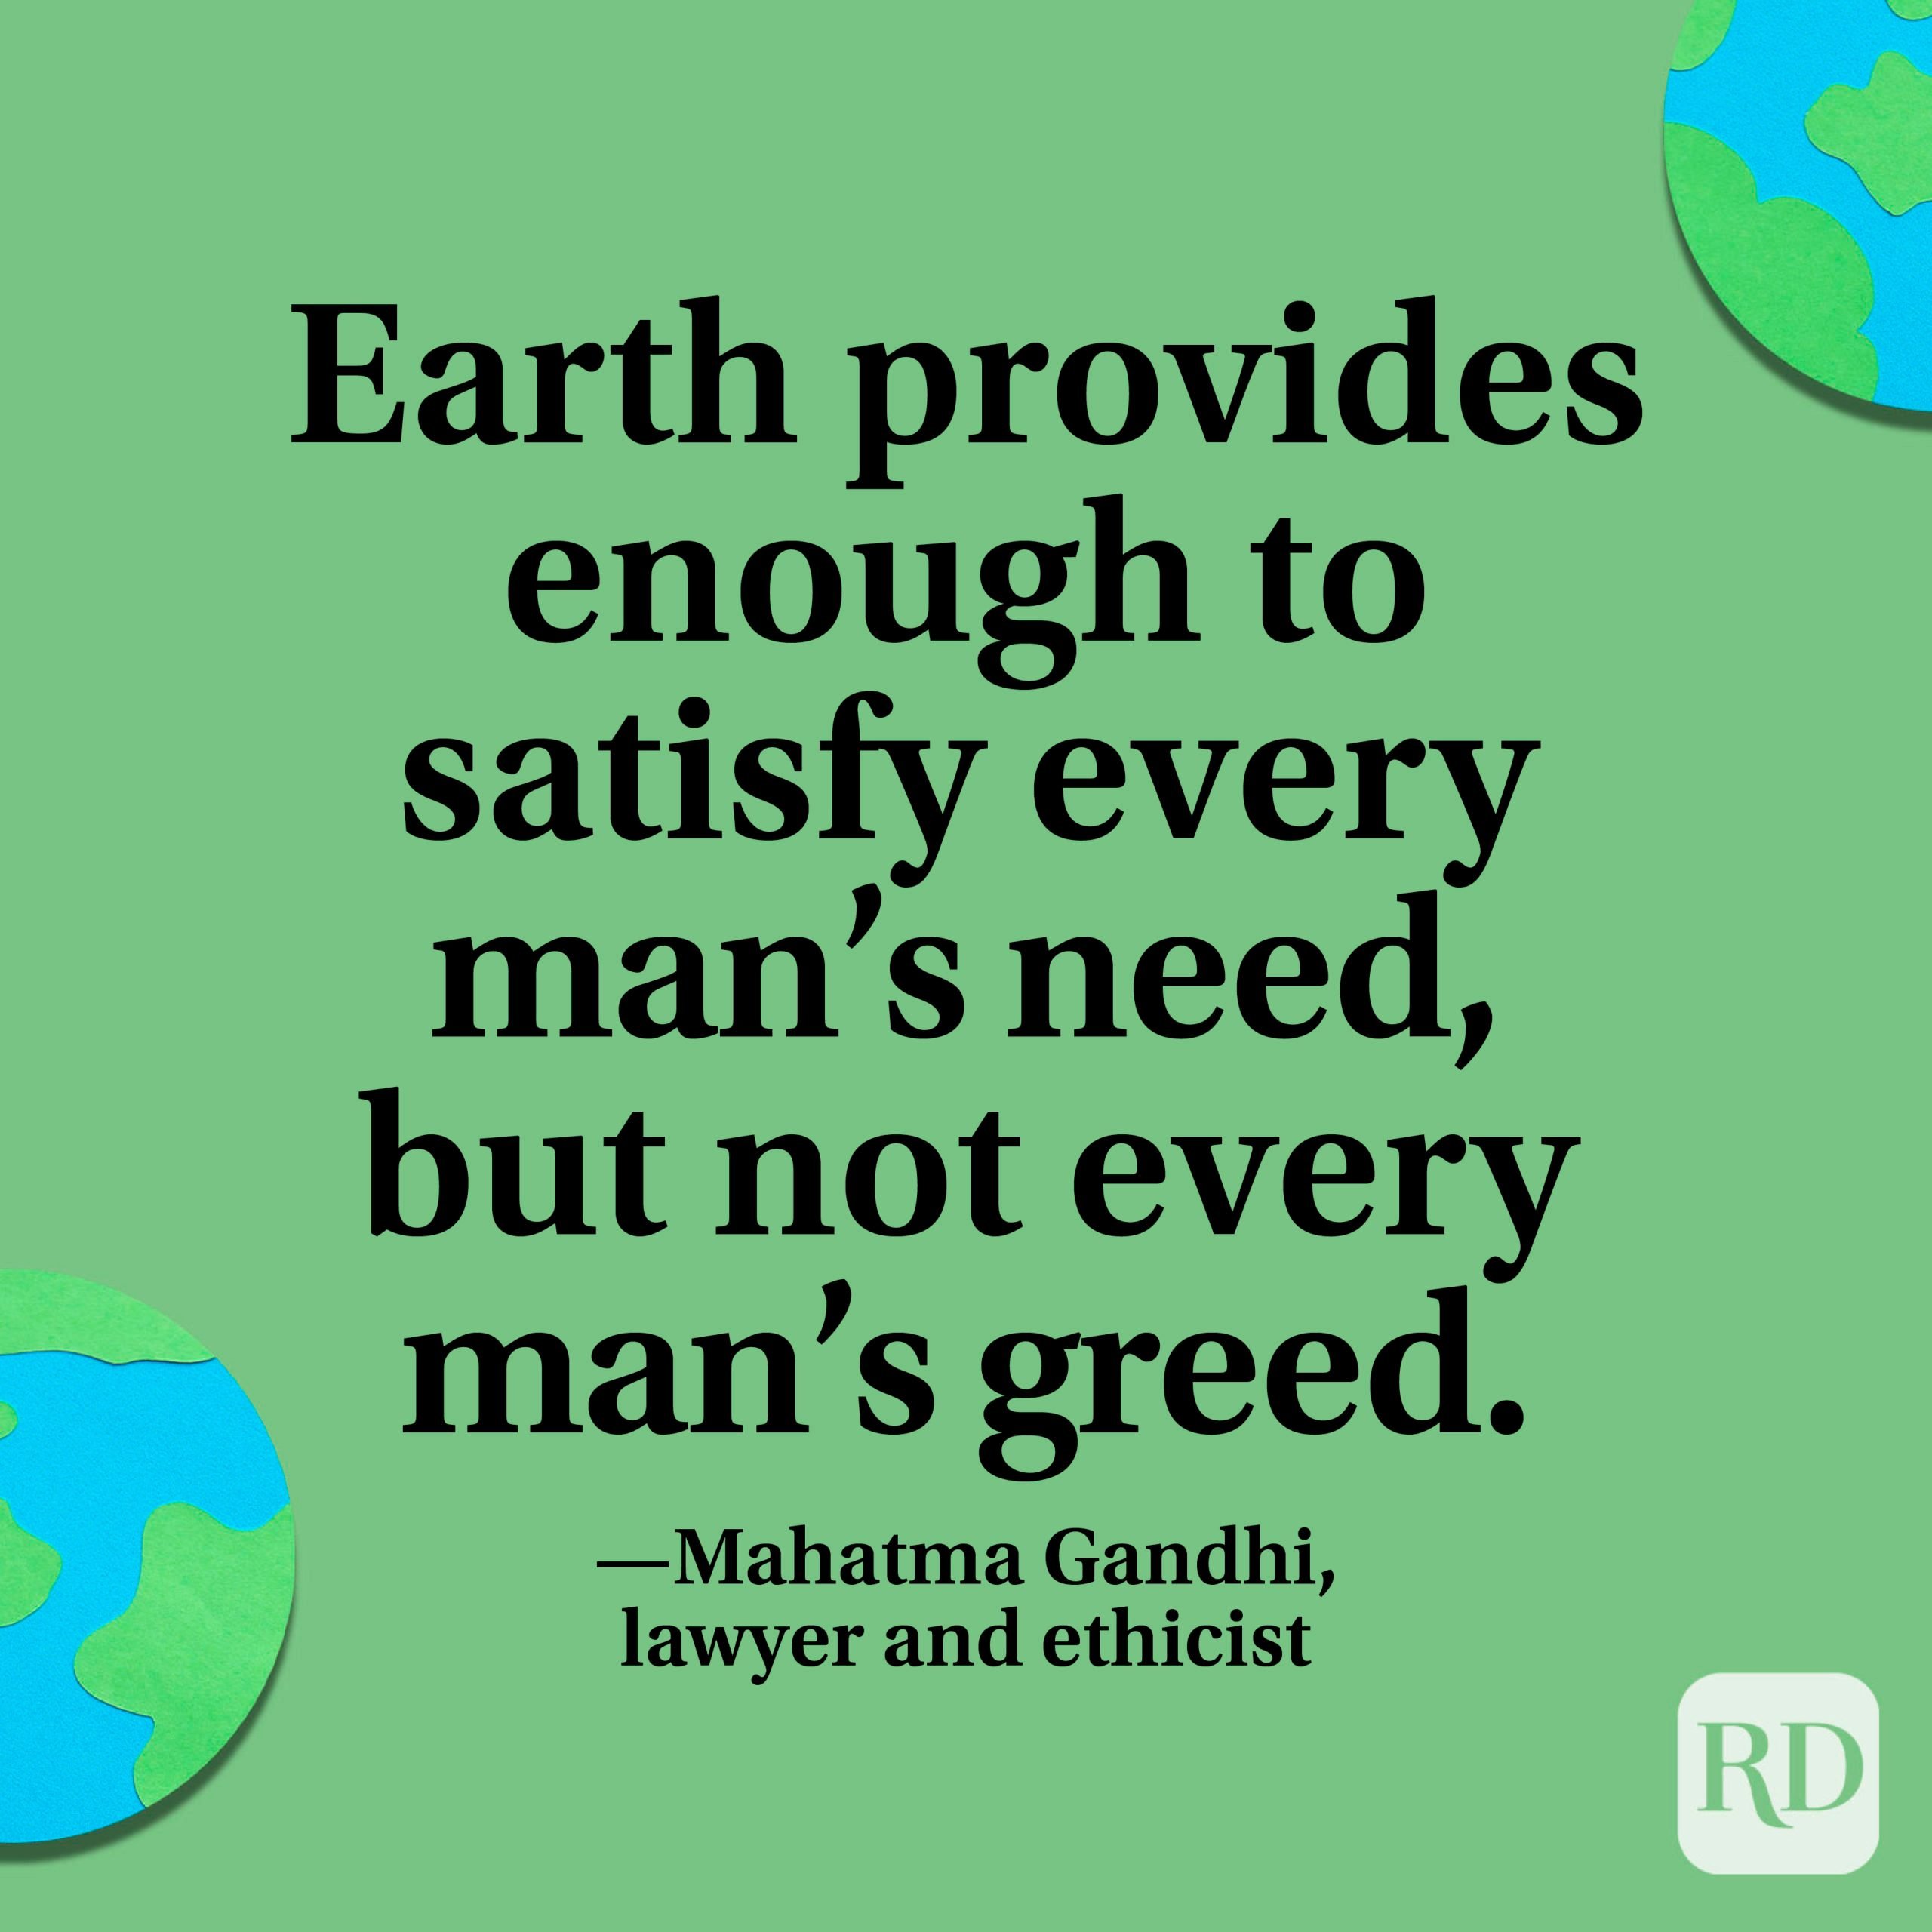 31 Earth Day Quotes to Share Reader's Digest